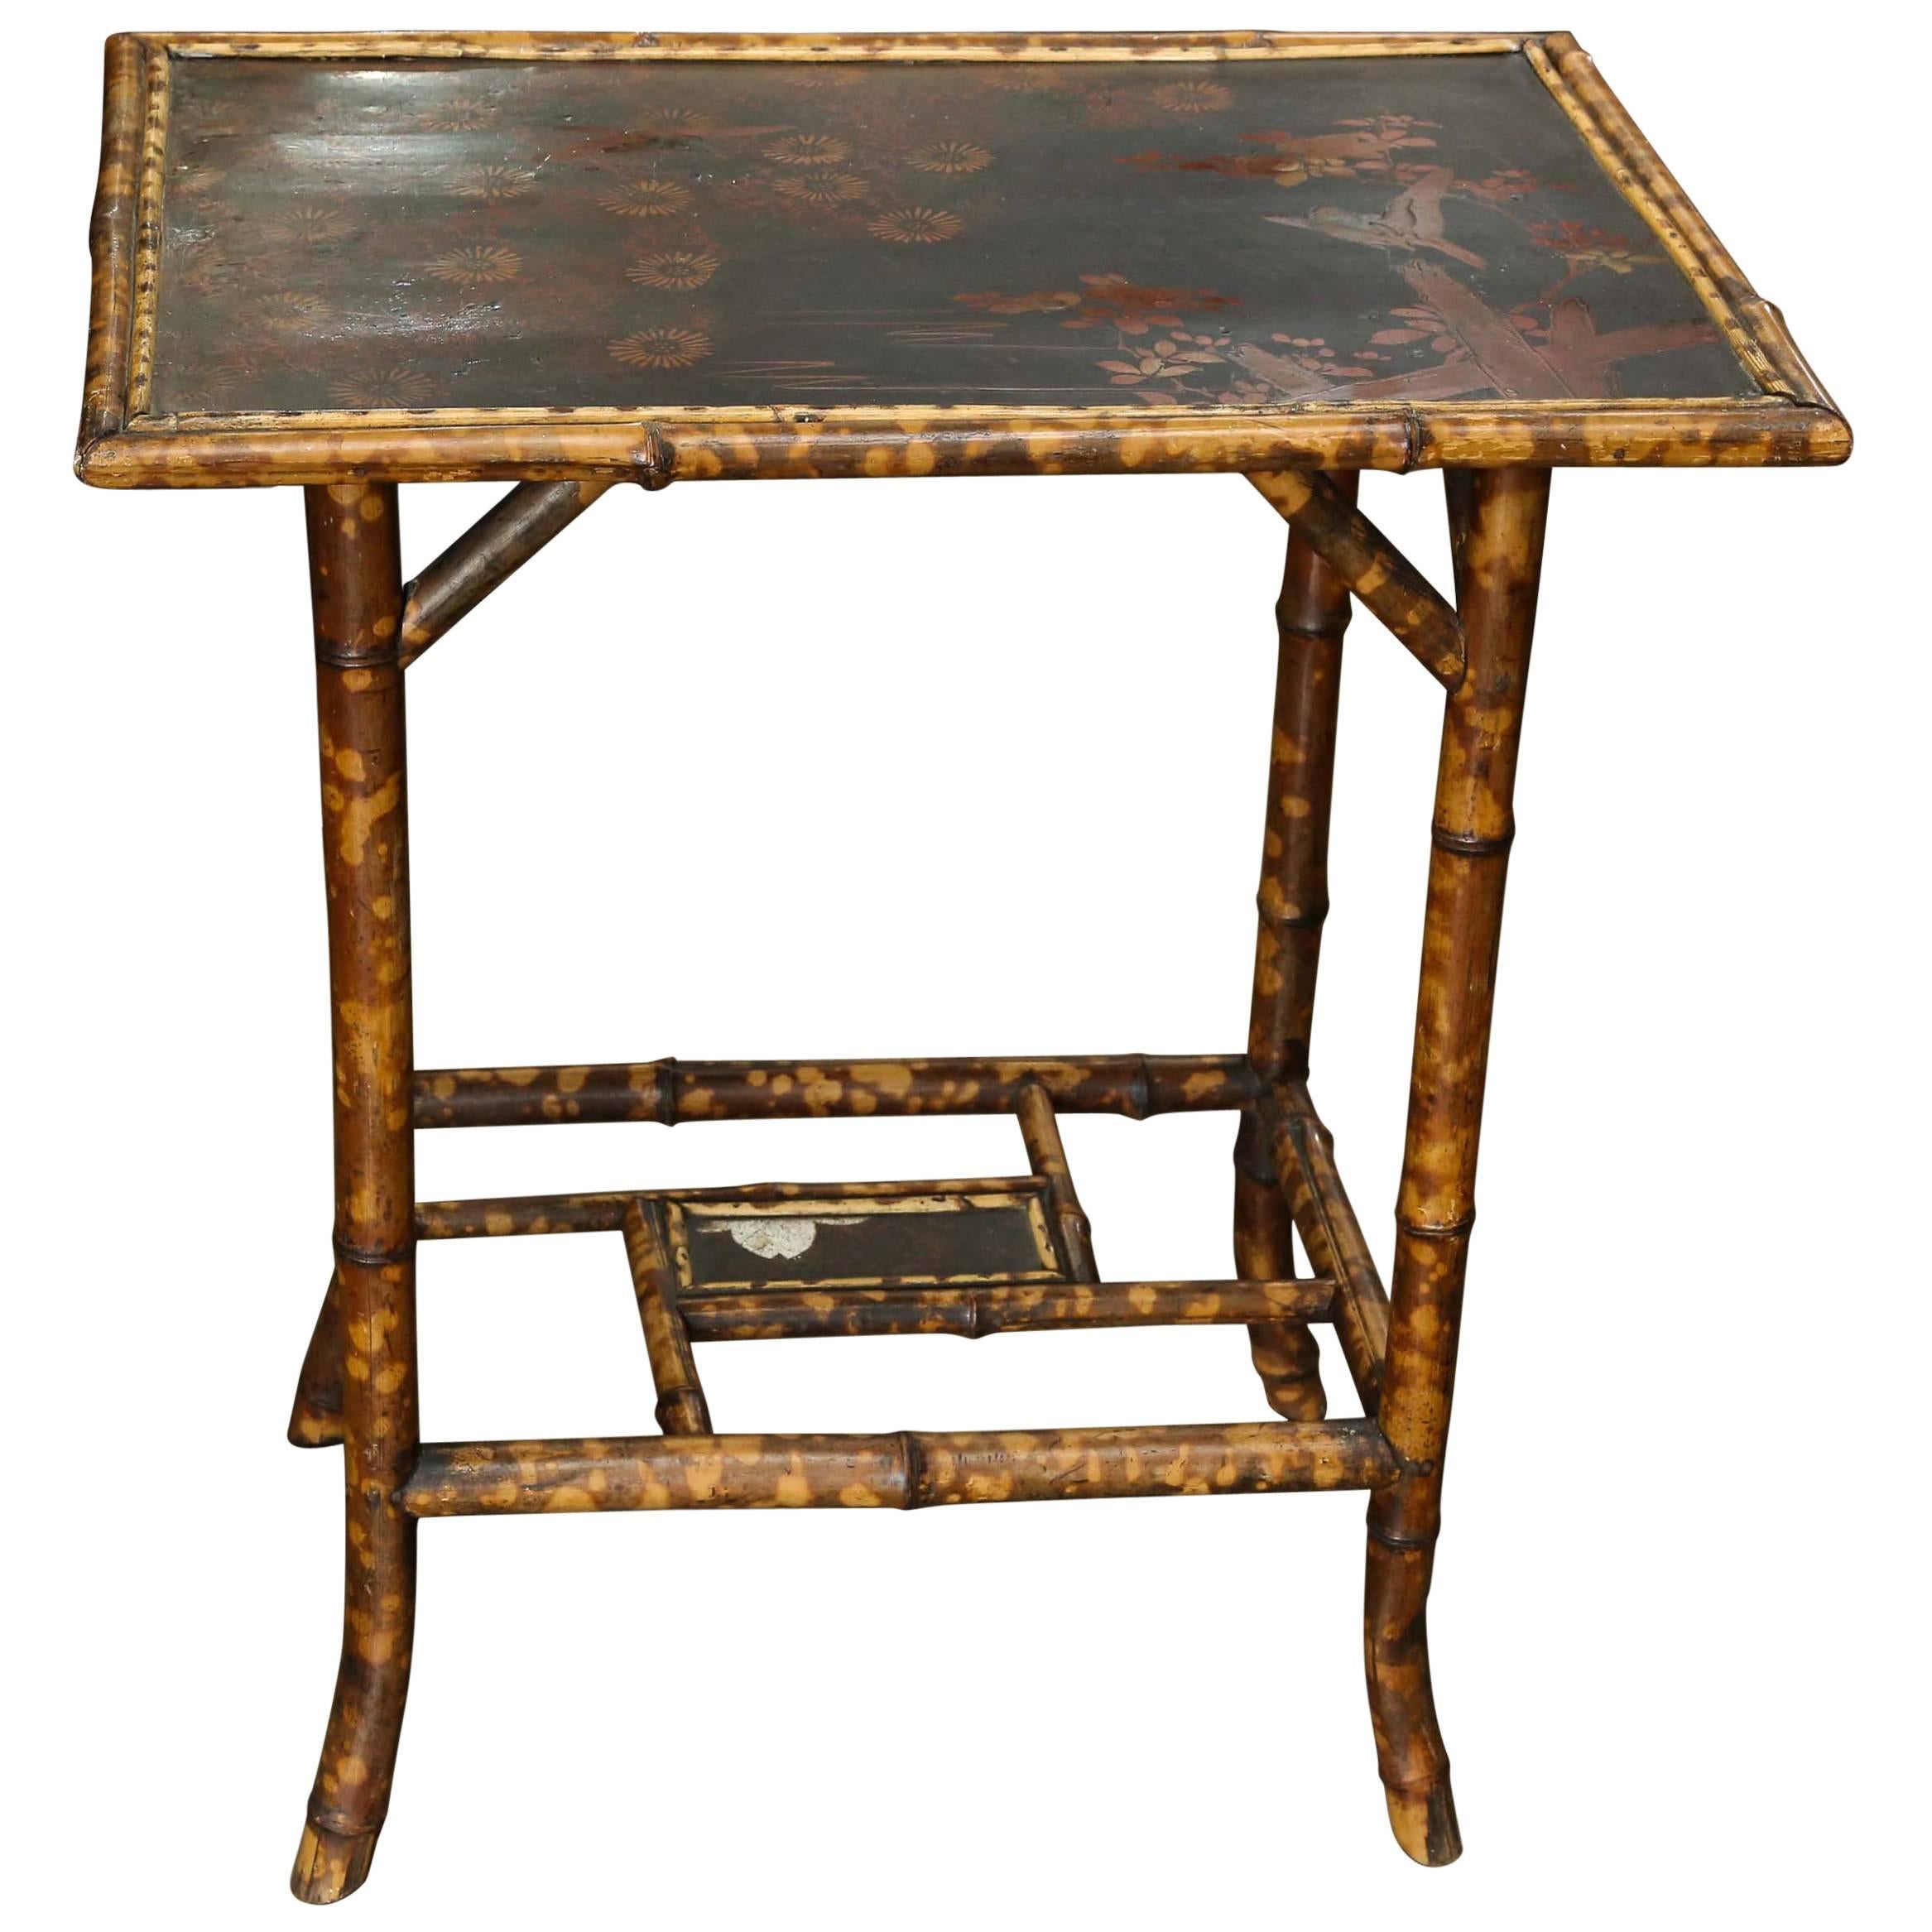 19th Century Scorched Bamboo Side Table with Chinoiserie Detail on Top